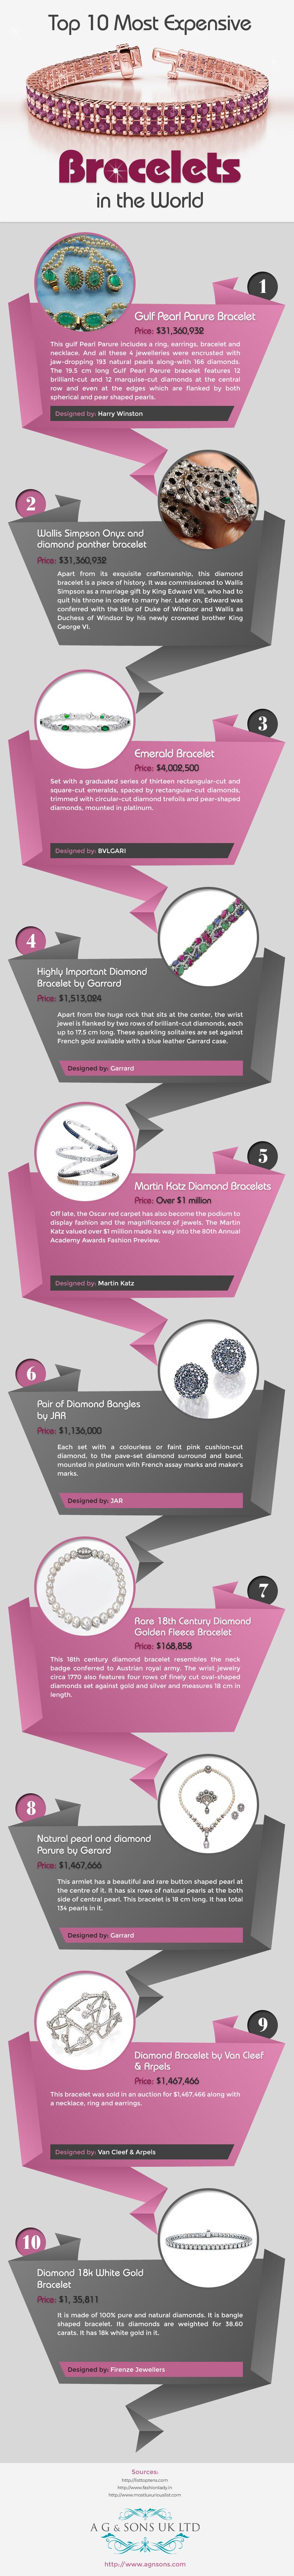 Mariage - Top 10 Most Expensive Bracelets in the World